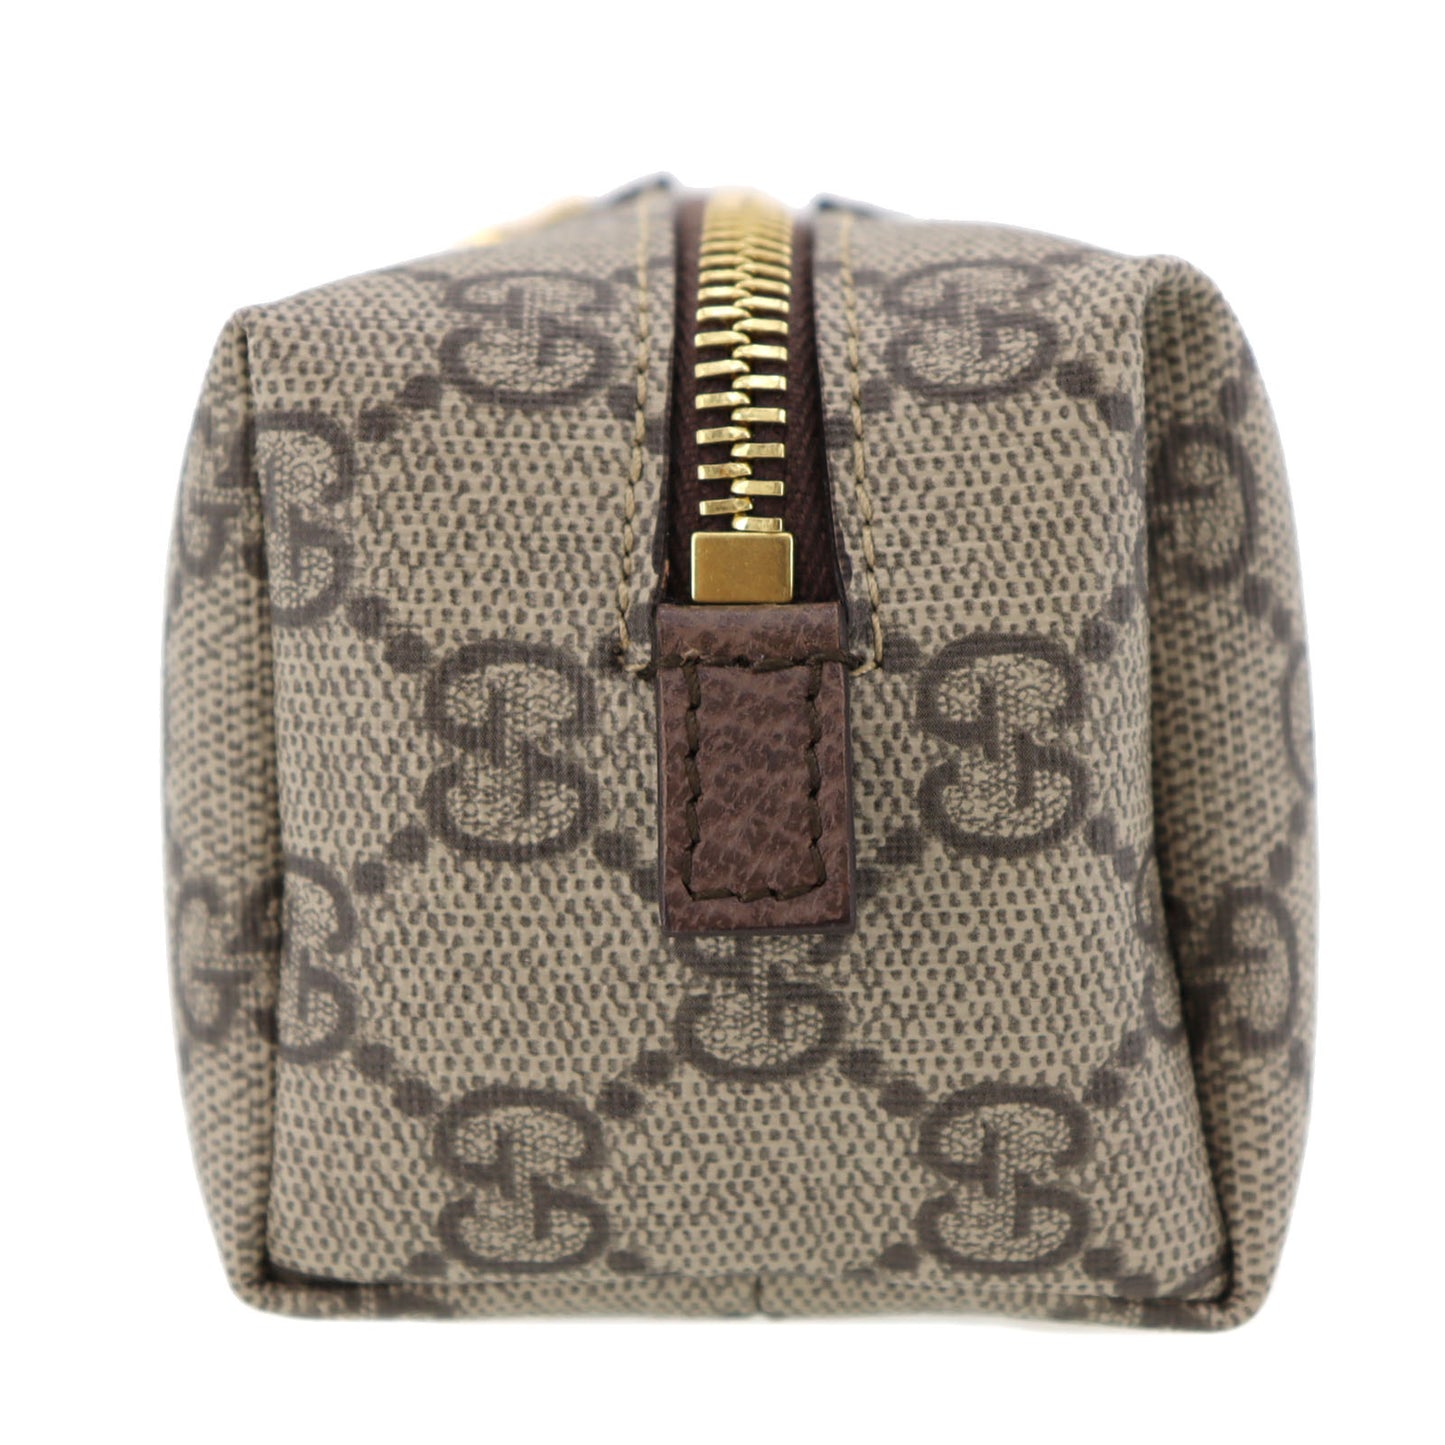 GUCCI Marment Pouch Brown PVC Leather #AG278